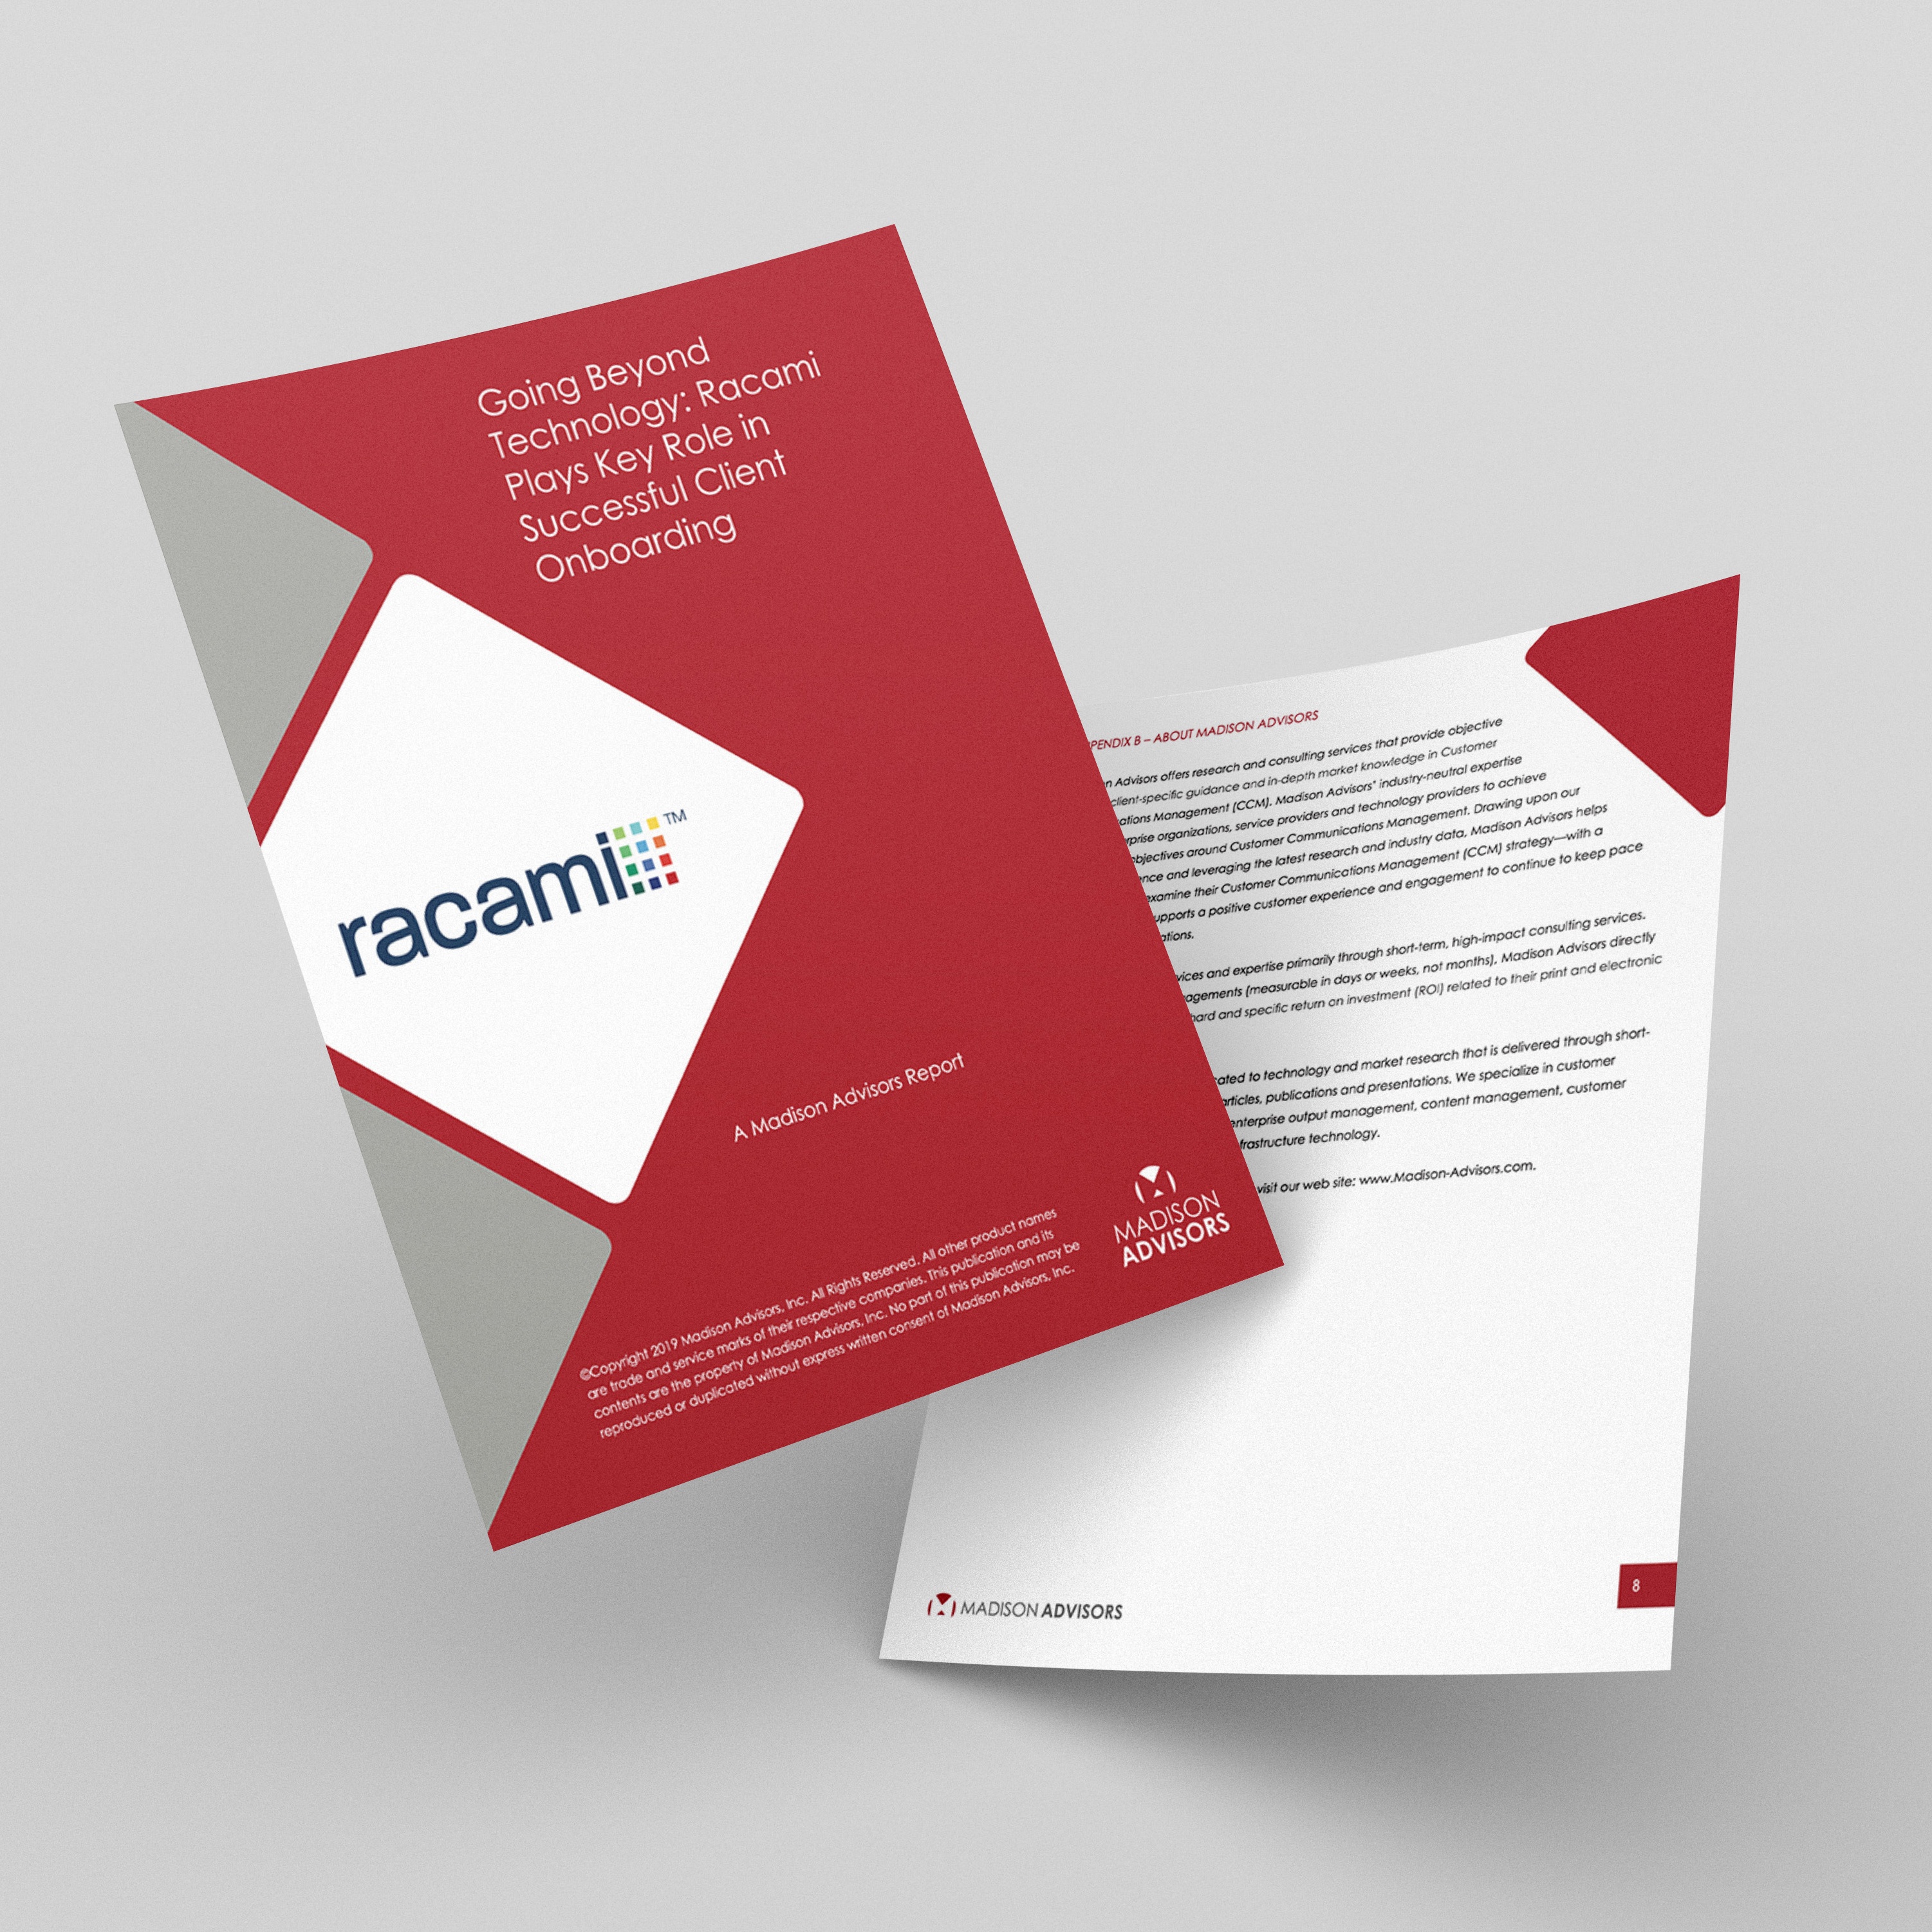 Going Beyond Technology: Racami Plays Key Role in Successful Client Onboarding